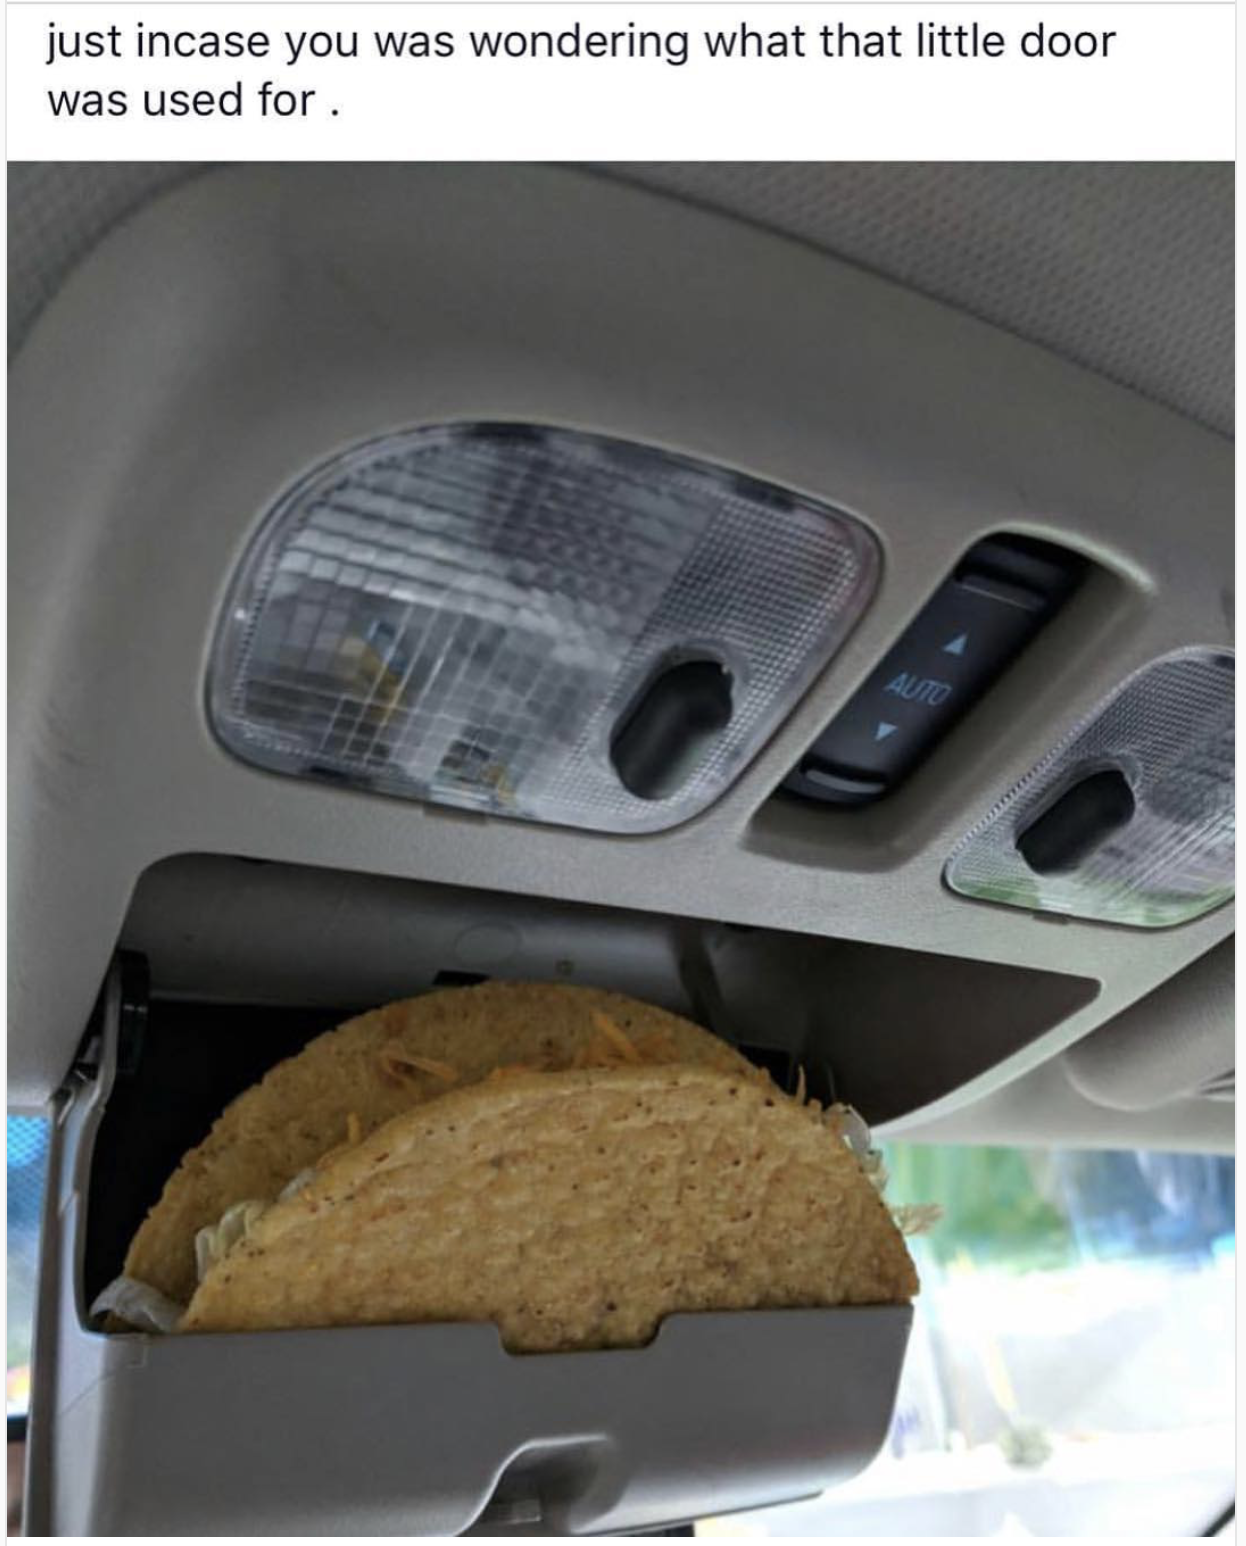 taco car - just incase you was wondering what that little door was used for